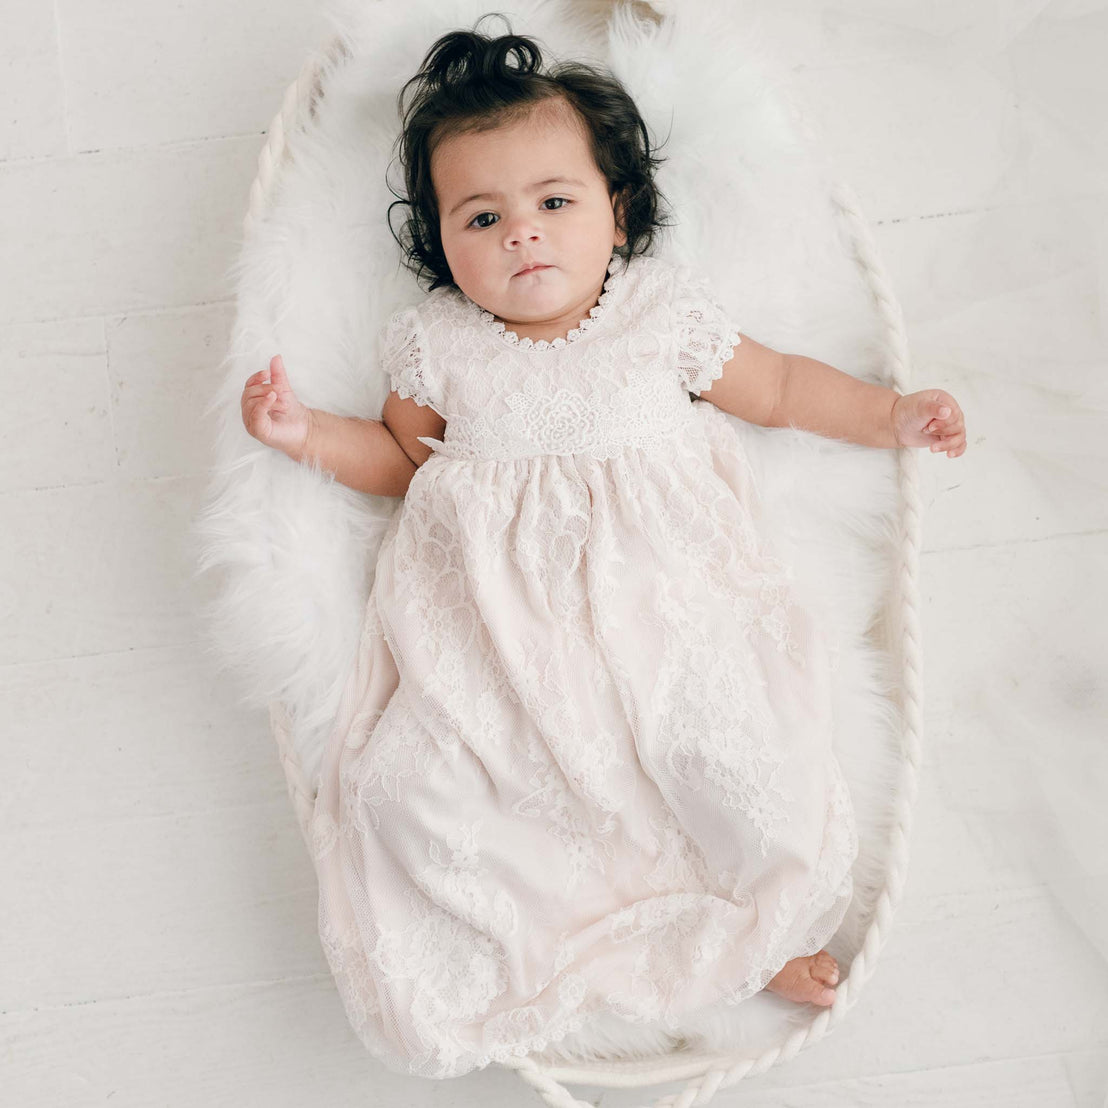 A baby wearing a white lace dress lies peacefully in a luxury, vintage-inspired Juliette Layette, viewed from above on a light background.